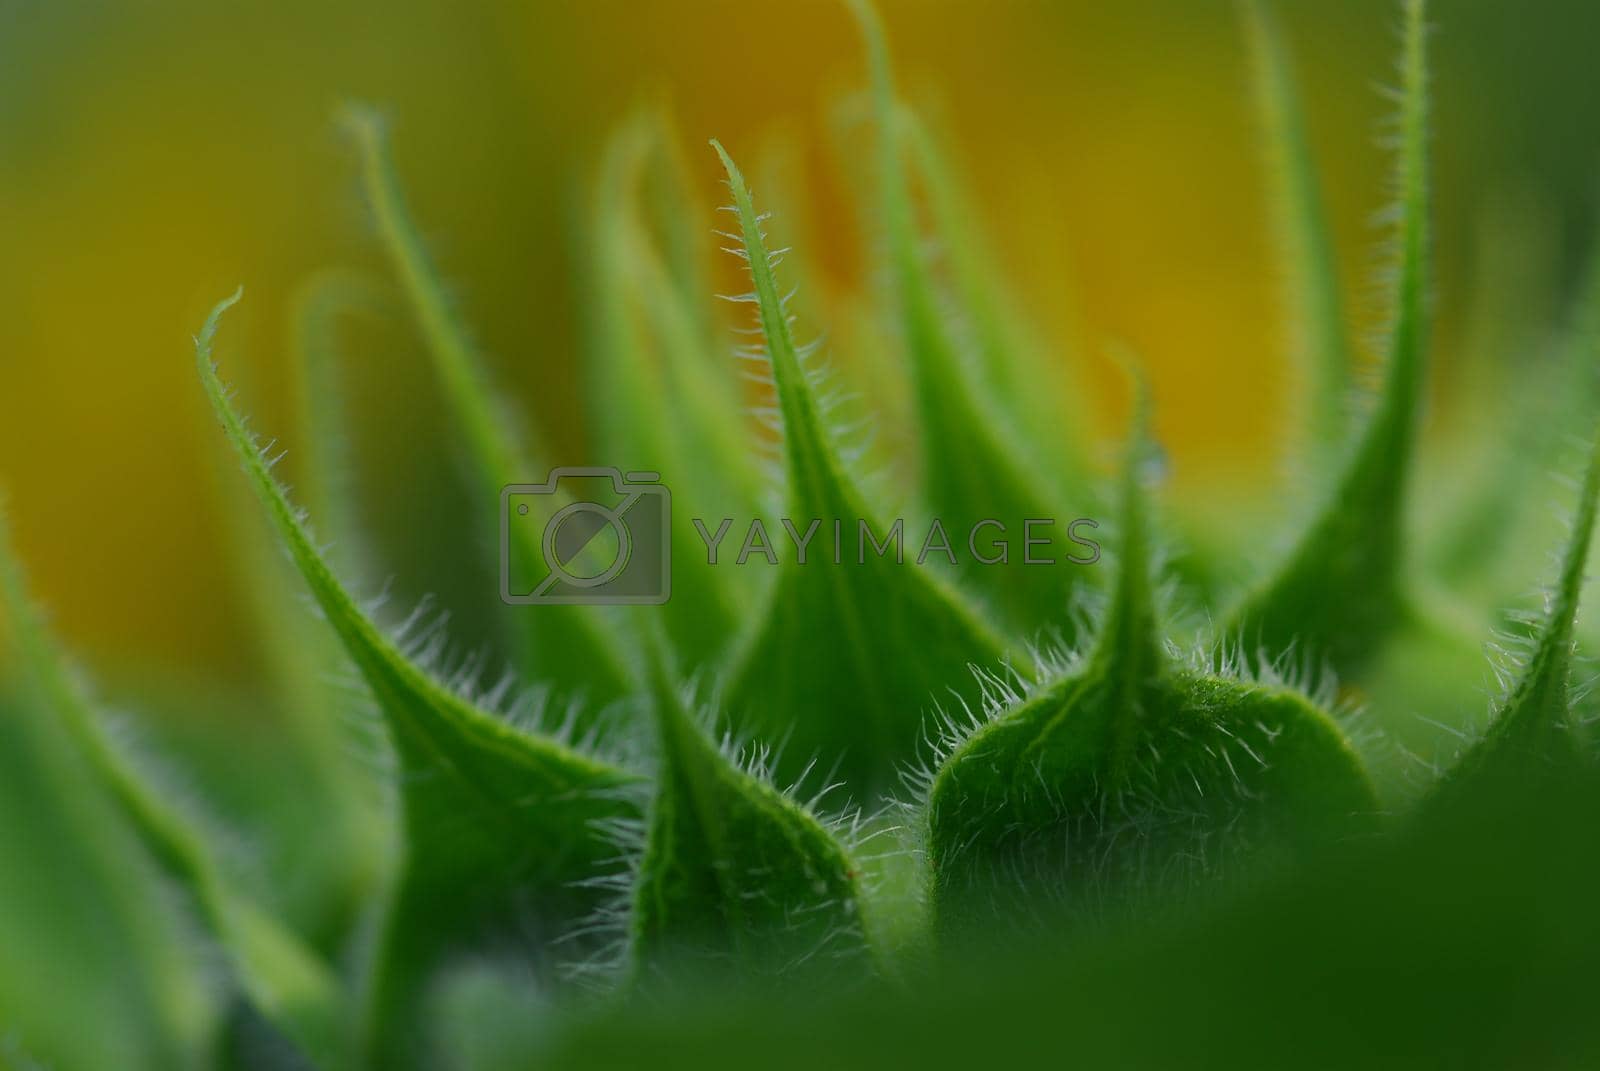 Royalty free image of Green bud sunflower close up by Rodseng